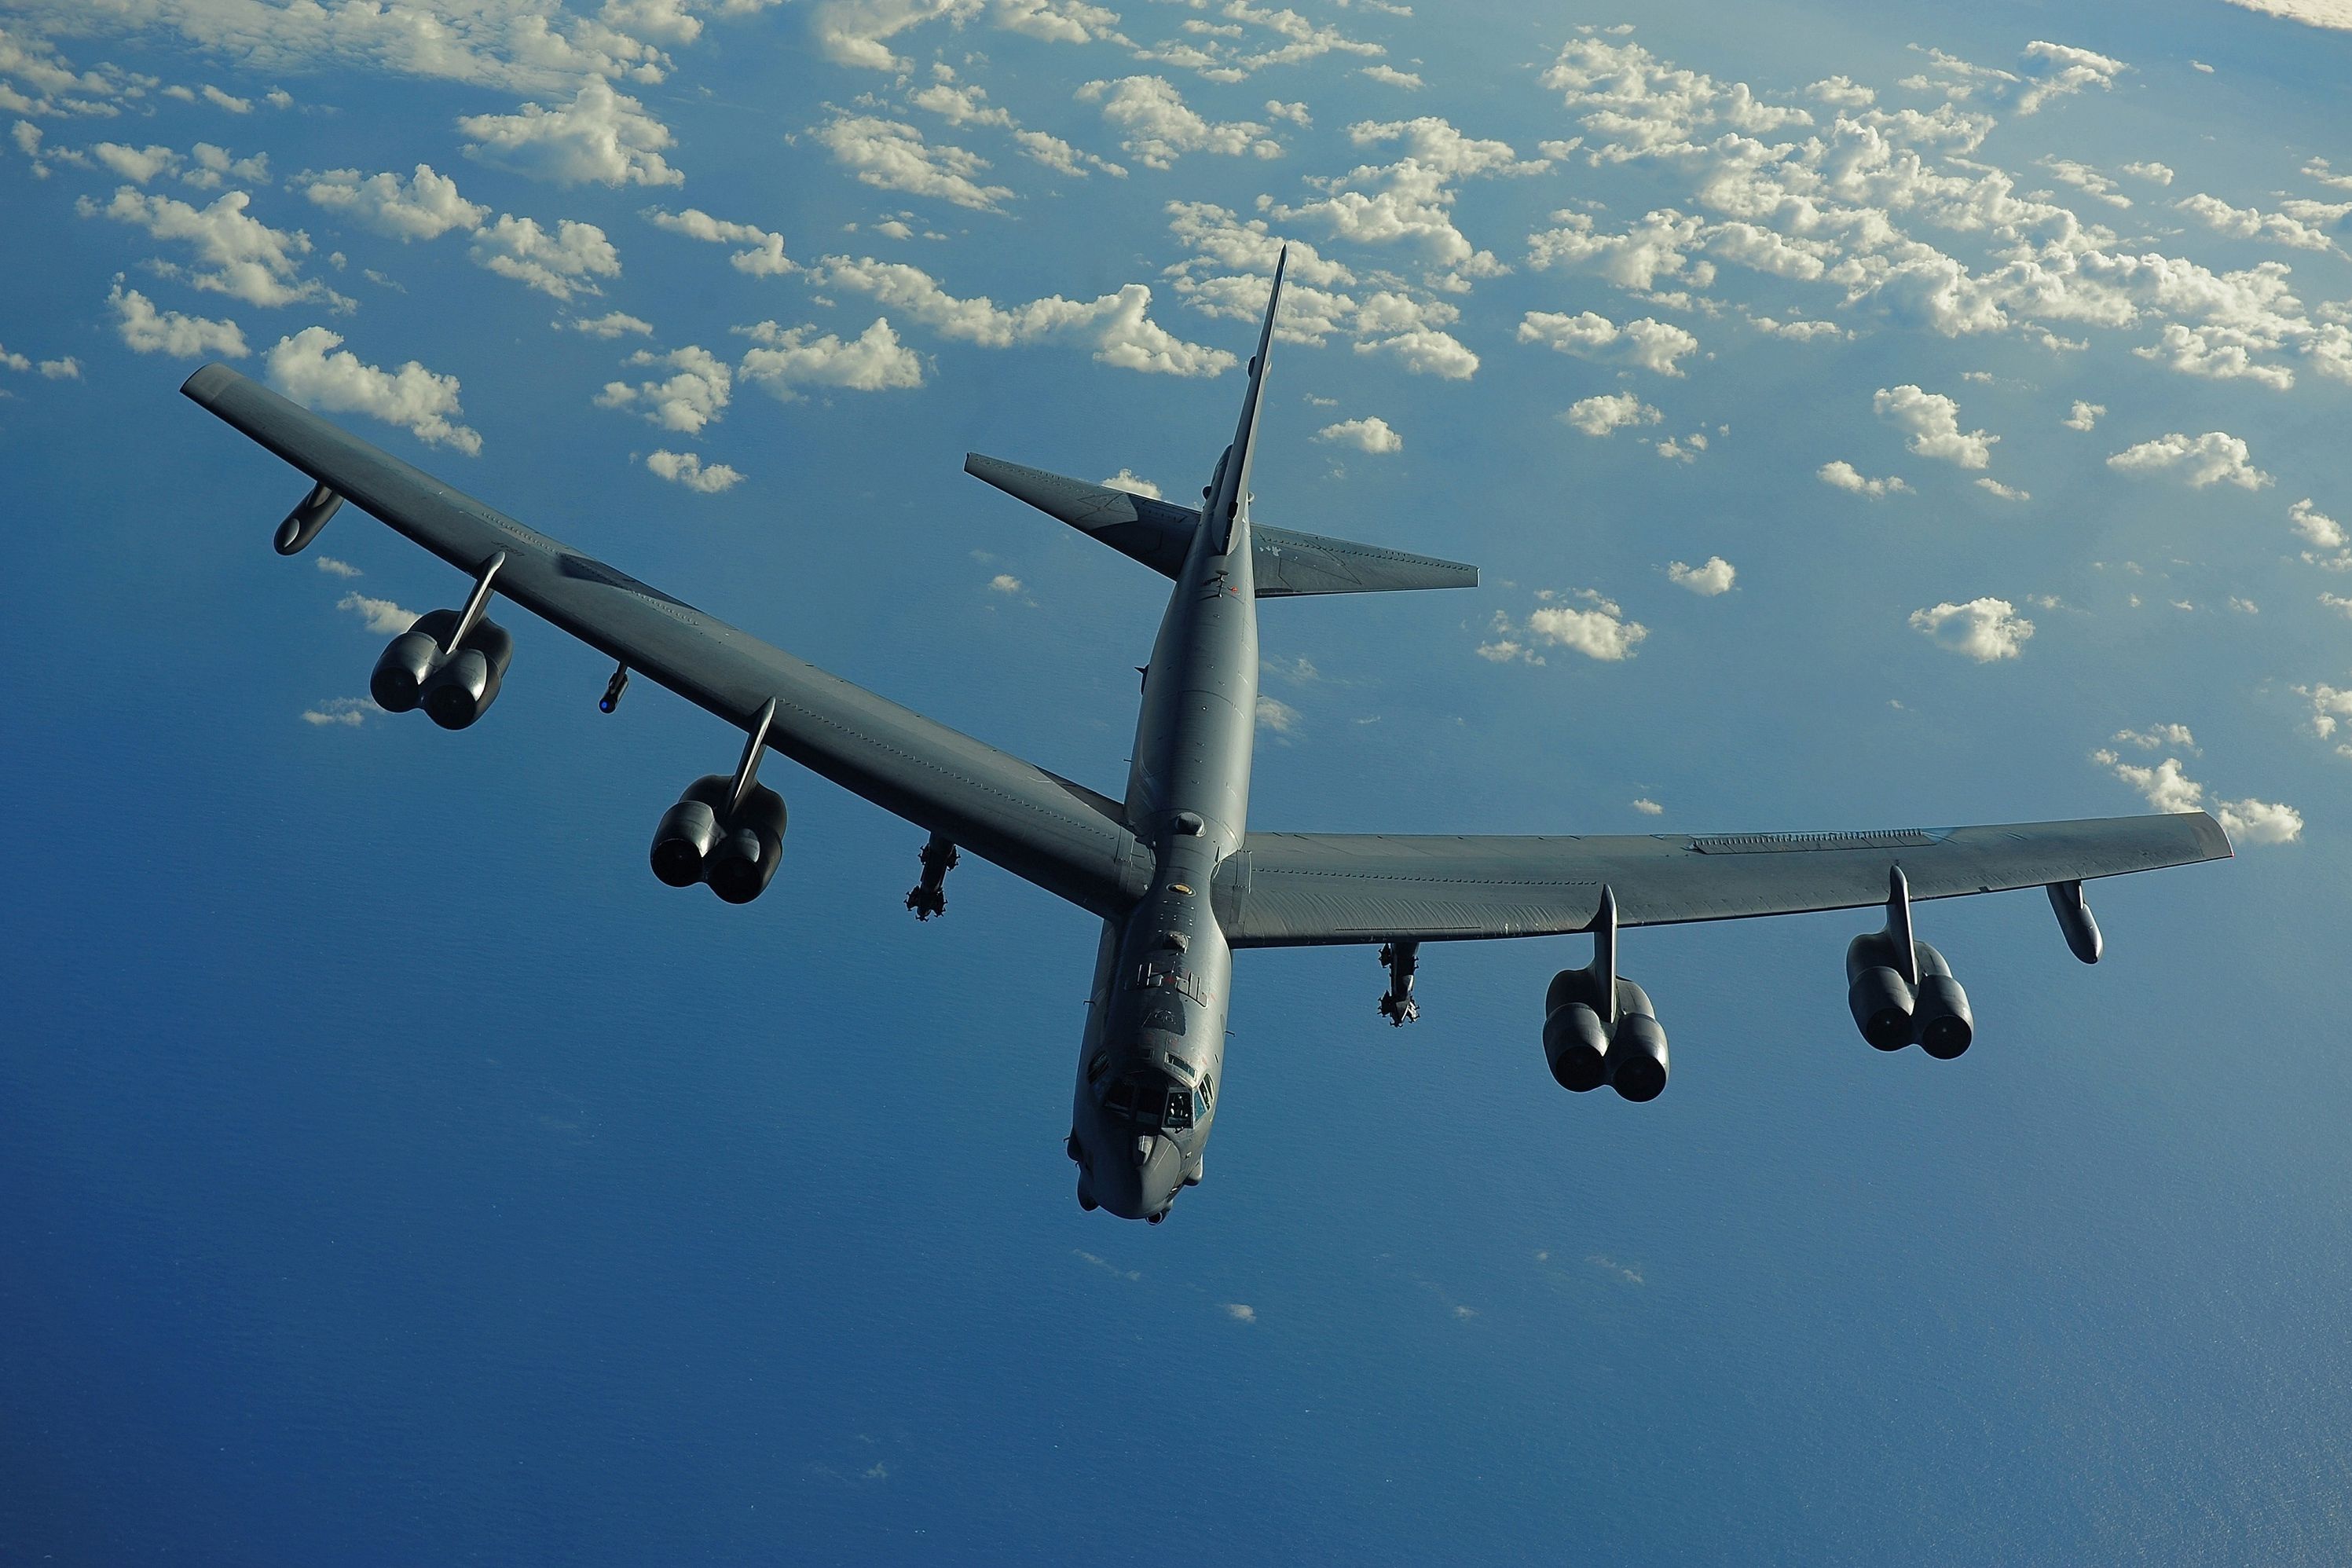 bayou vigilance: why the usaf landed 2 b-52 bombers at chennault international airport